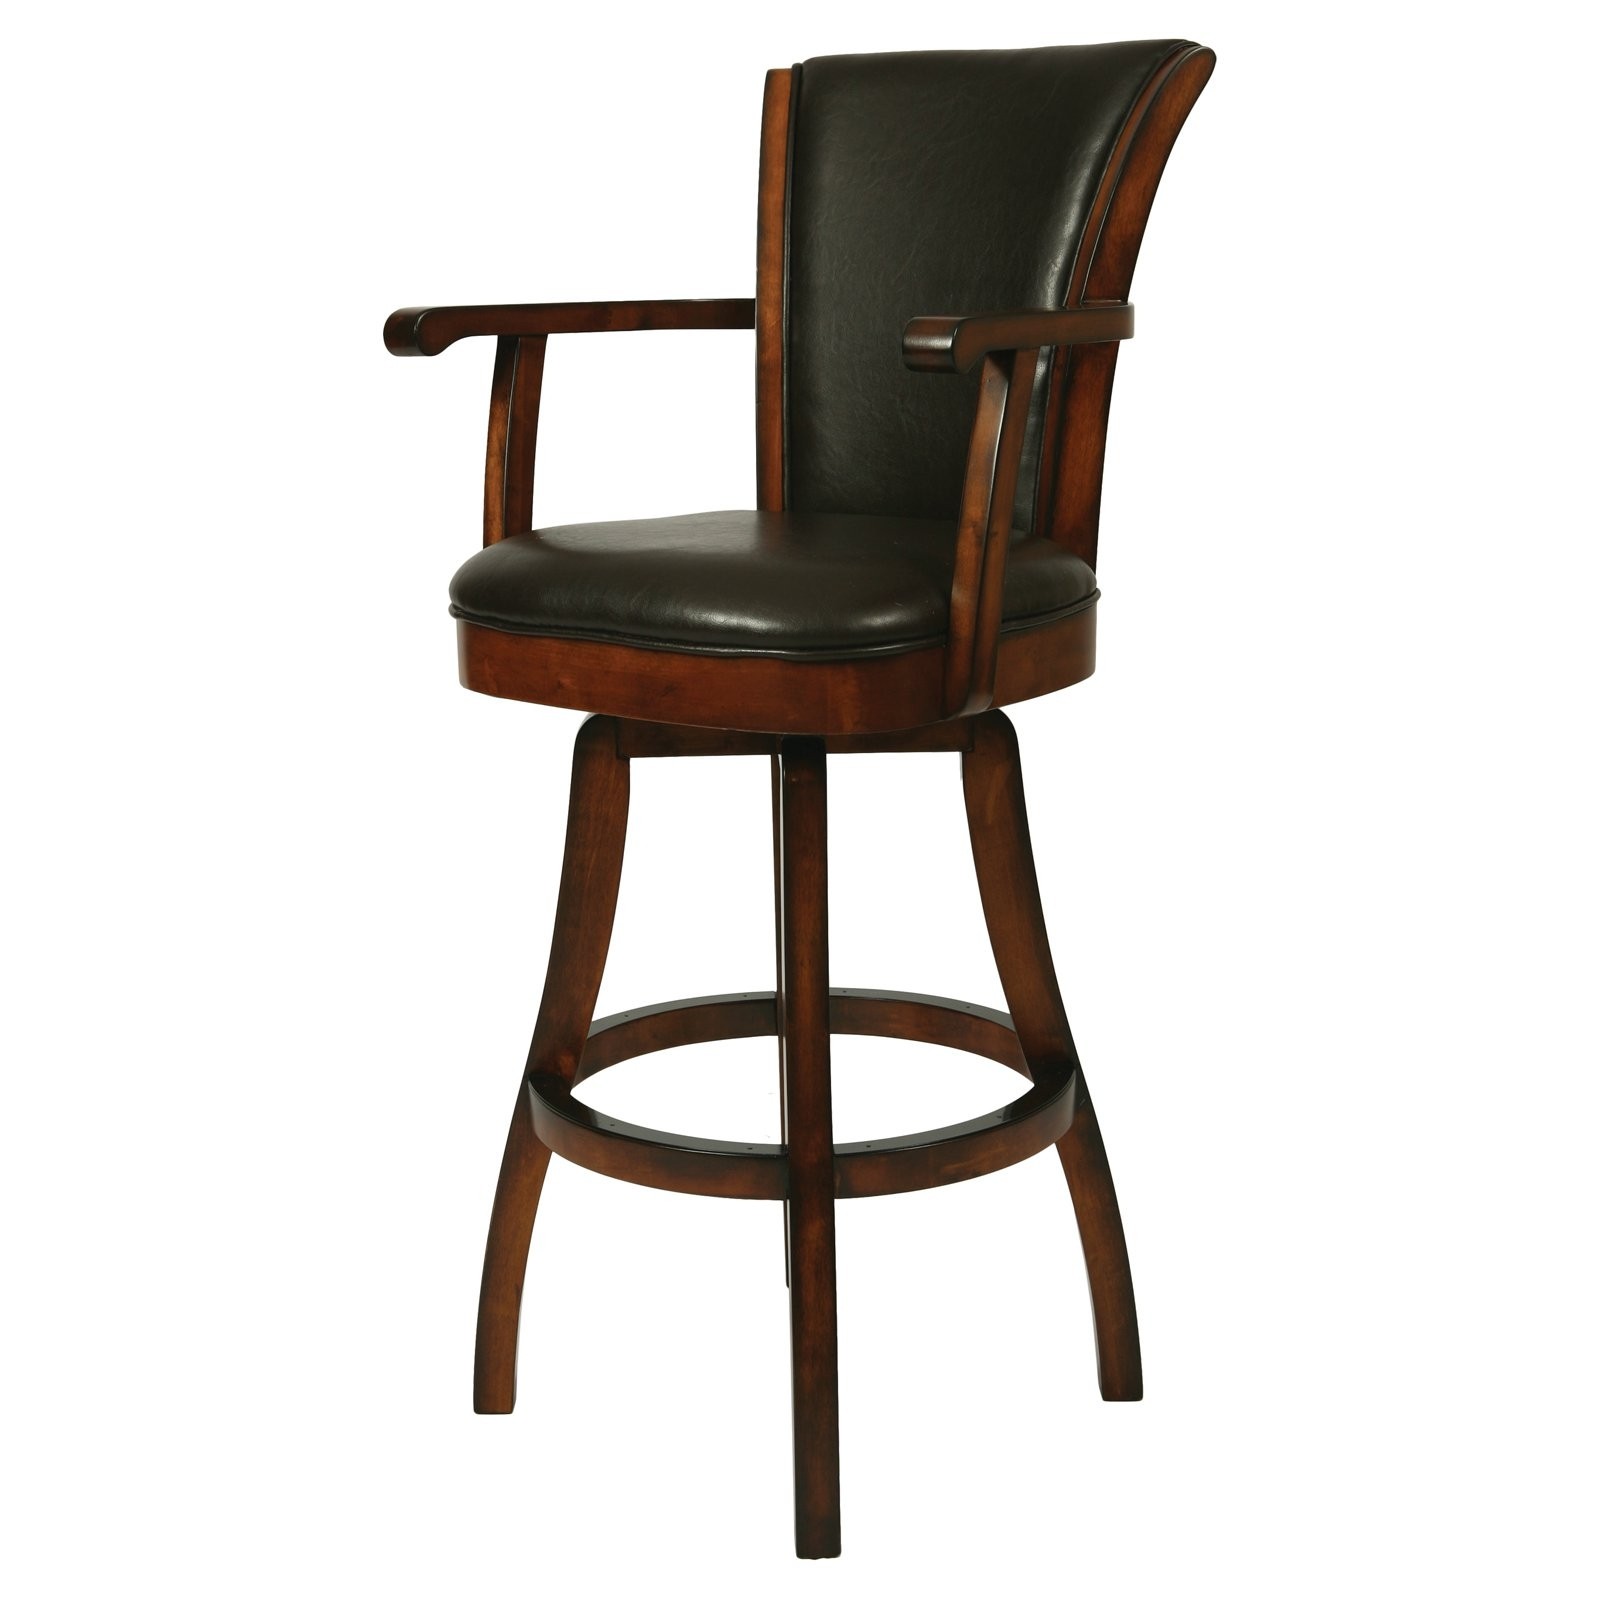 Bar stools with arms and backs